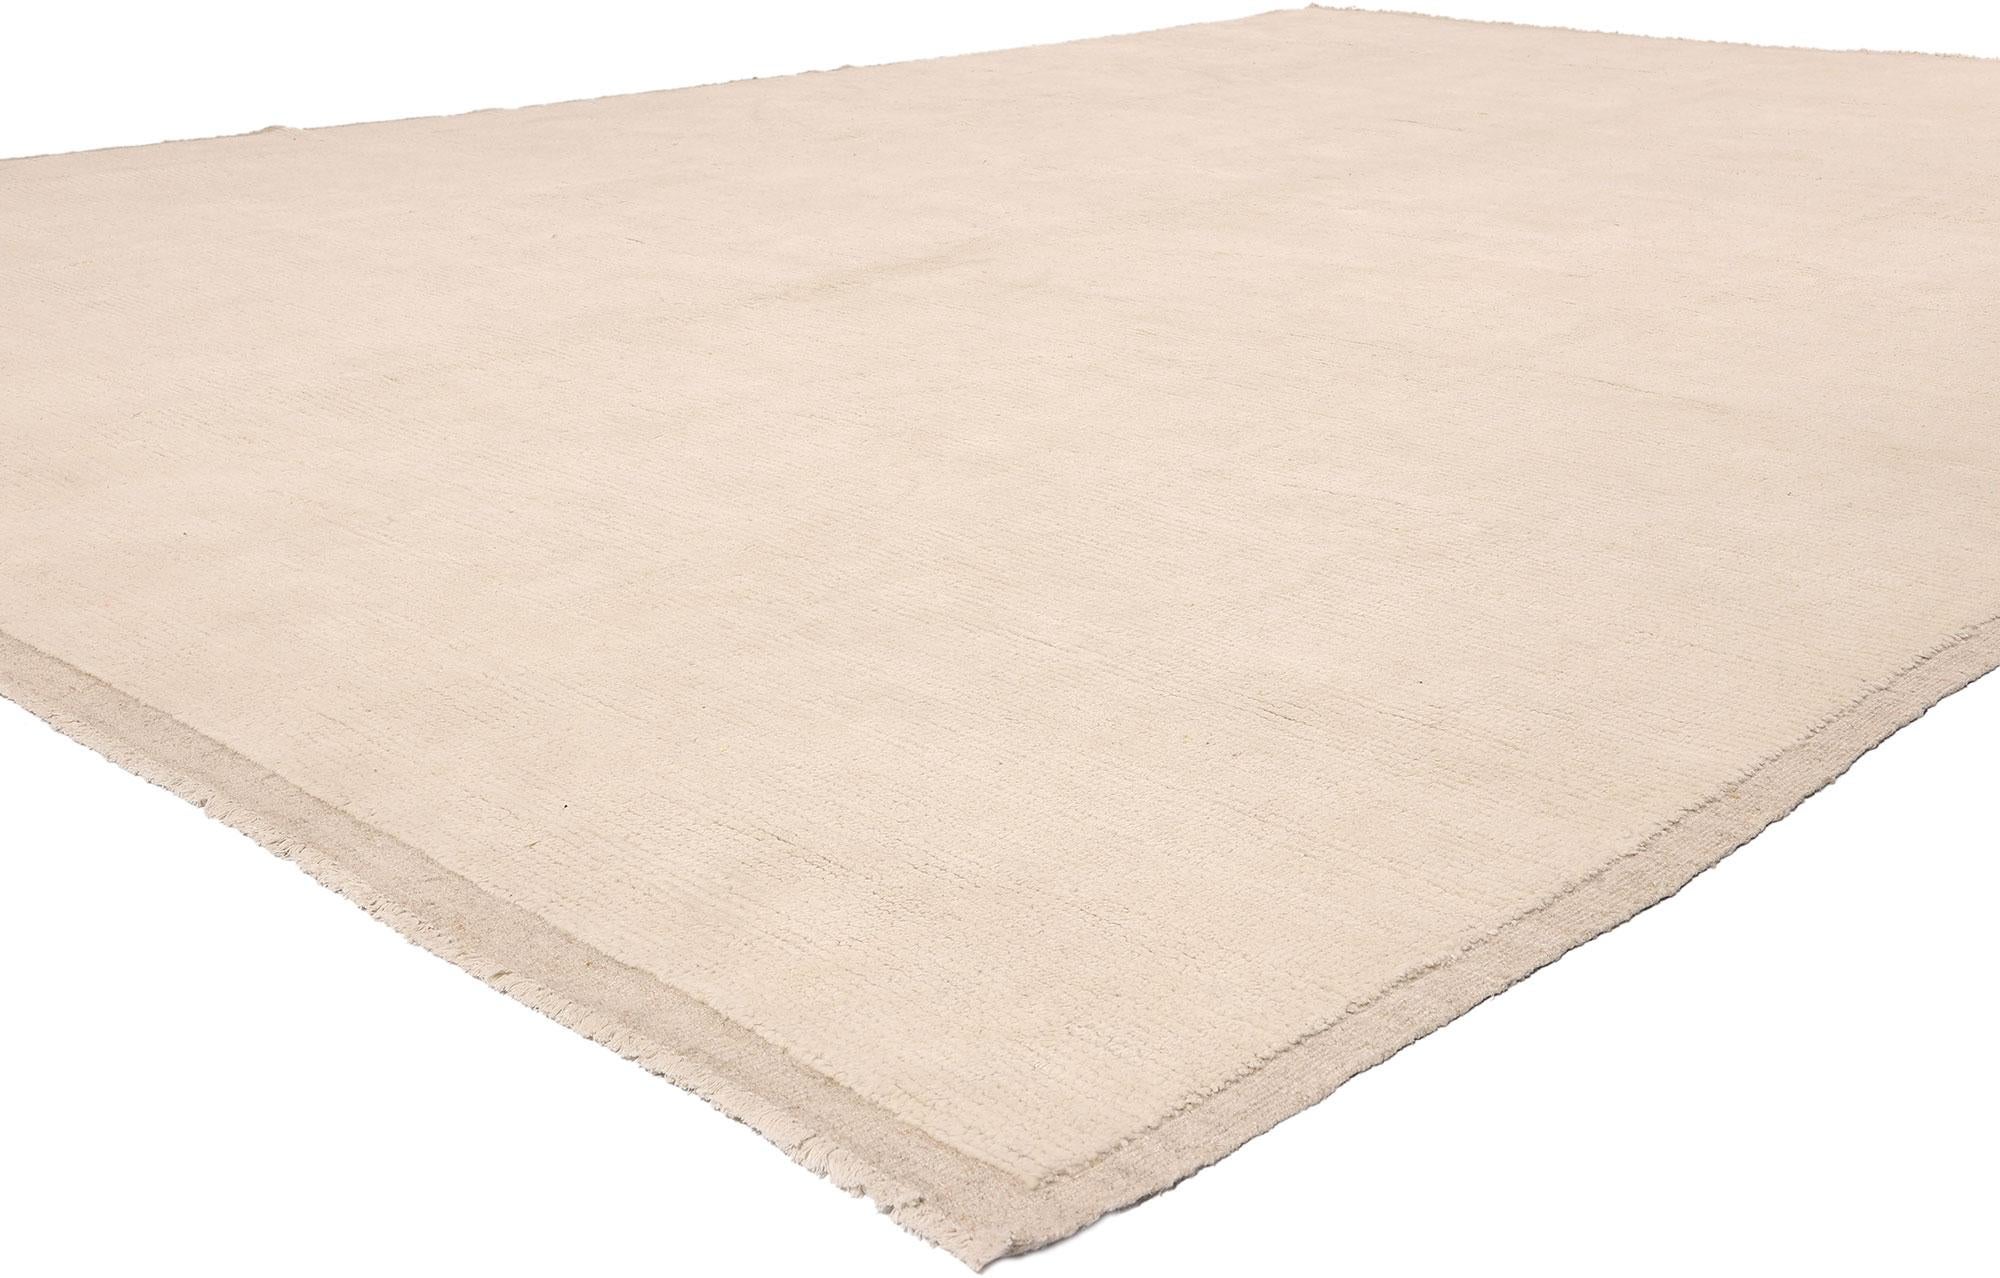 81067 Organic Modern Moroccan Minimalist Rug, 09'08 x 13'08. Crafted with meticulous care and attention to detail, our exquisite hand-knotted wool Moroccan rug embodies a captivating fusion of Organic Modernism and Scandinavian Minimalism. Made from